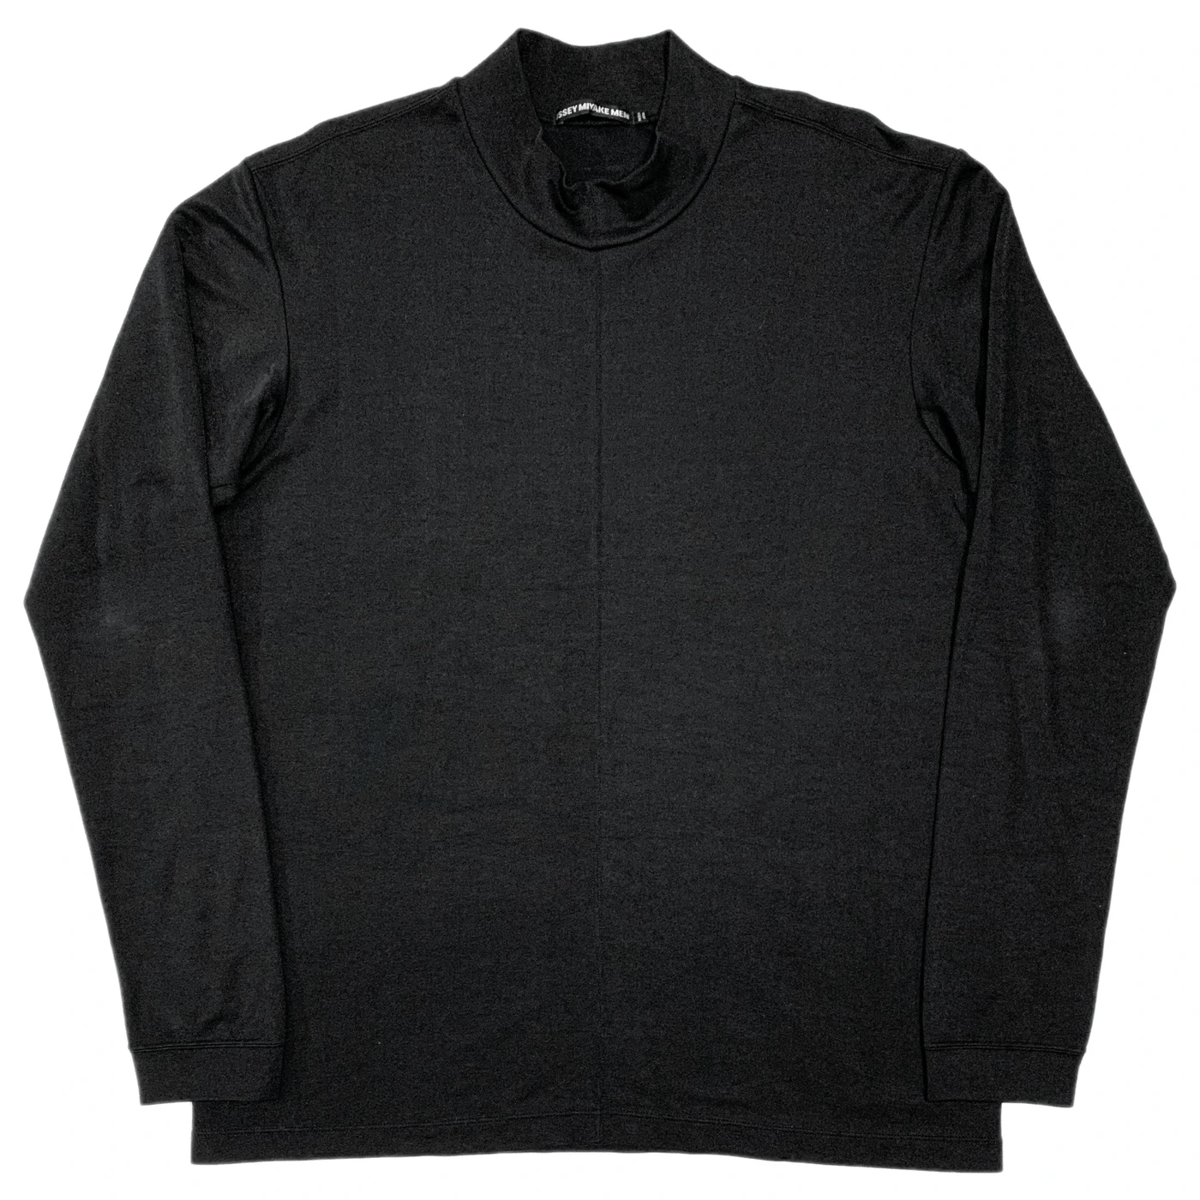 Why Did Steve Jobs Love The Turtleneck Sweater So Much?